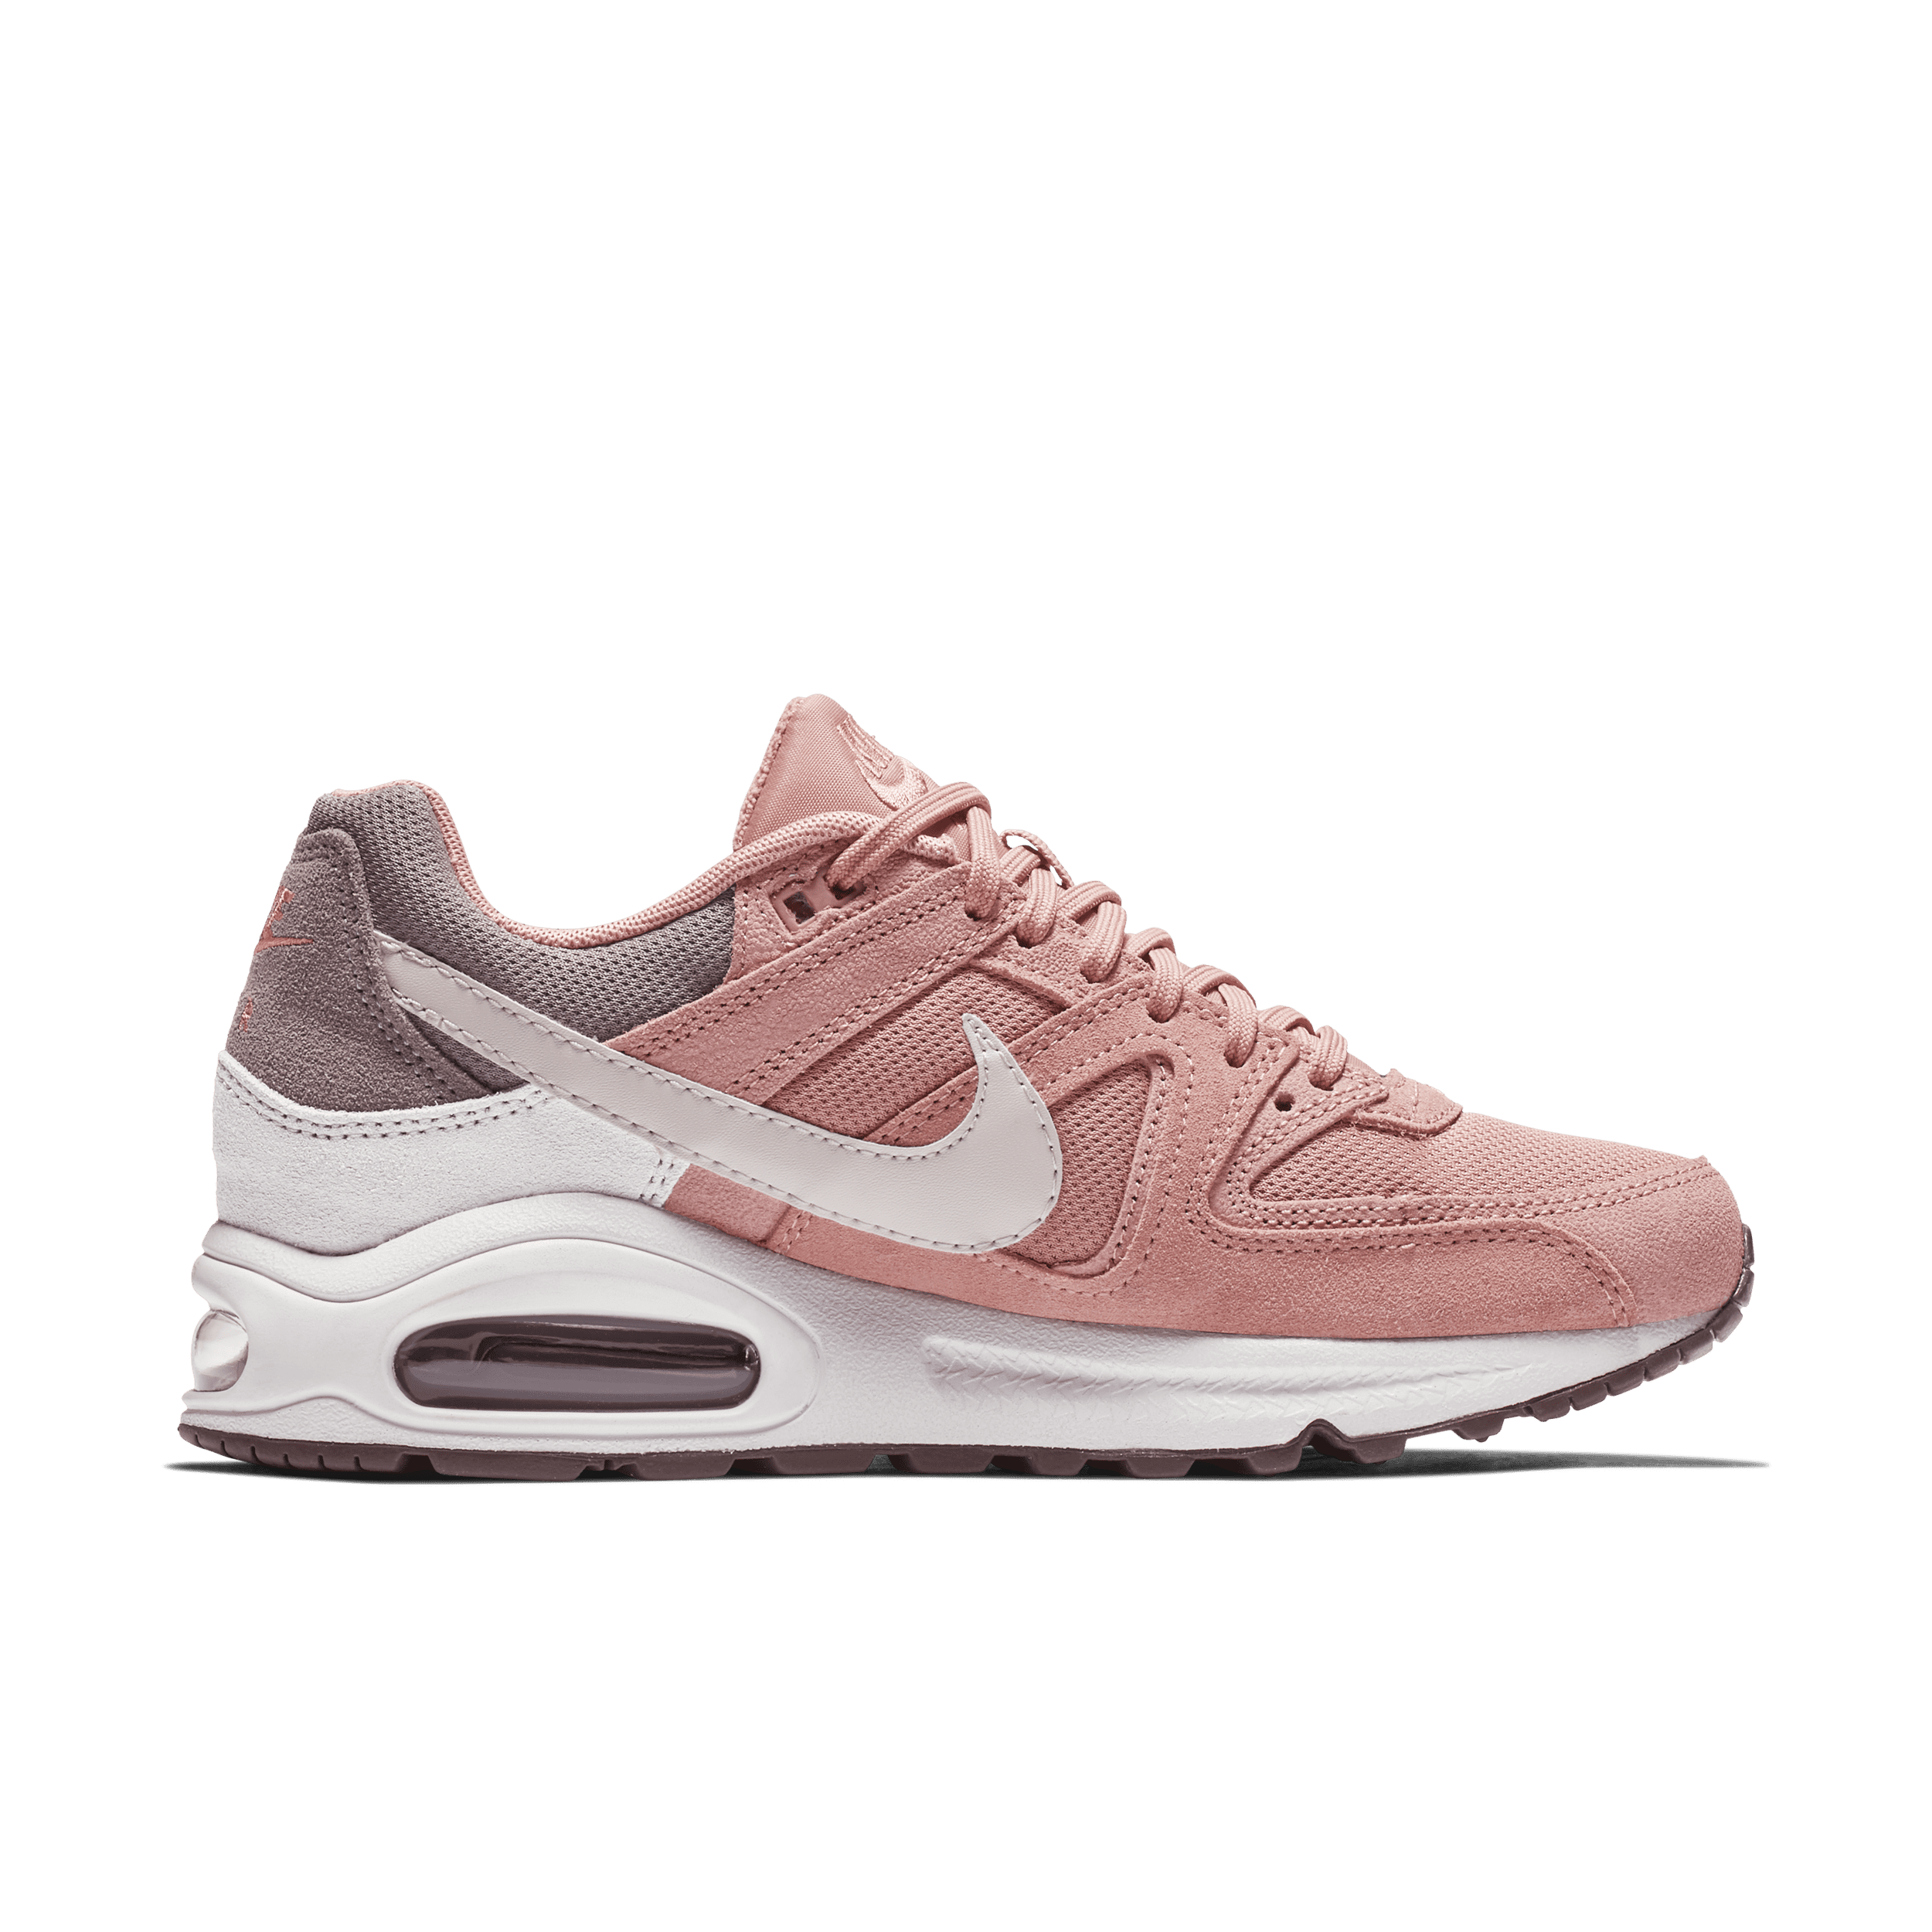 fontein Ontkennen incompleet Nike Womens Air Max Command Shoes | 397690-600 | FOOTY.COM